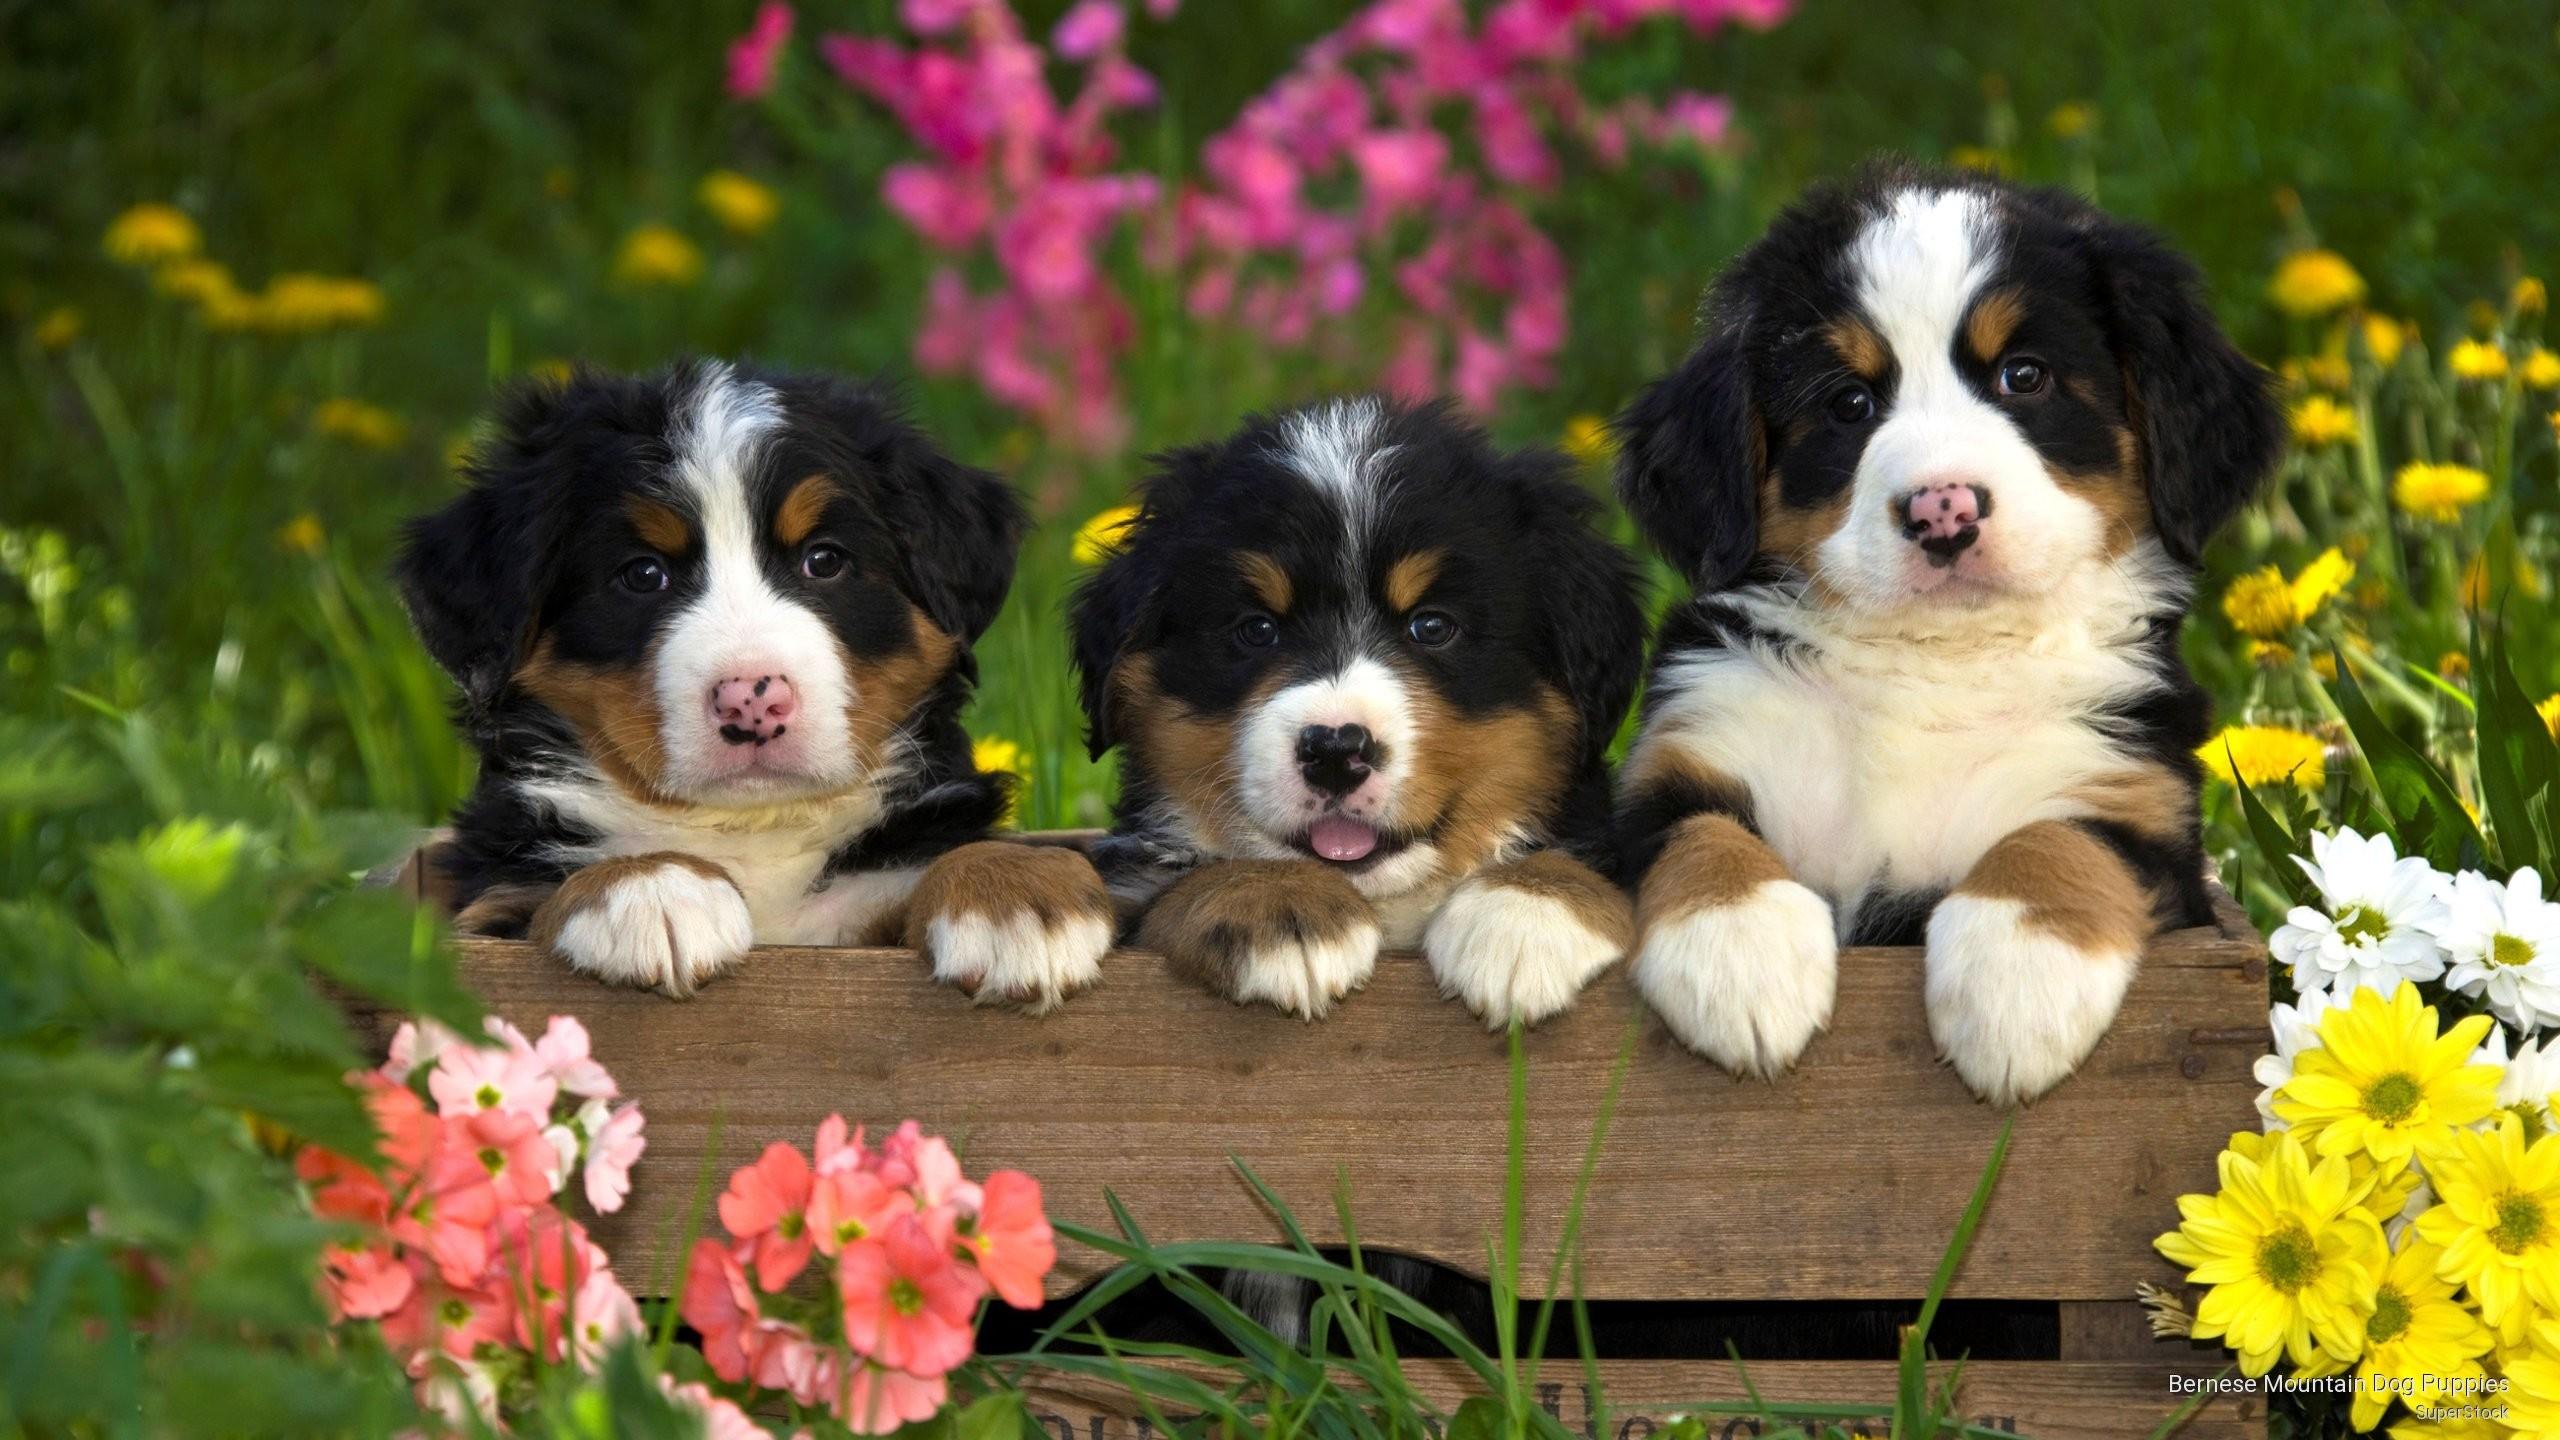 Puppies and Flowers Wallpaper